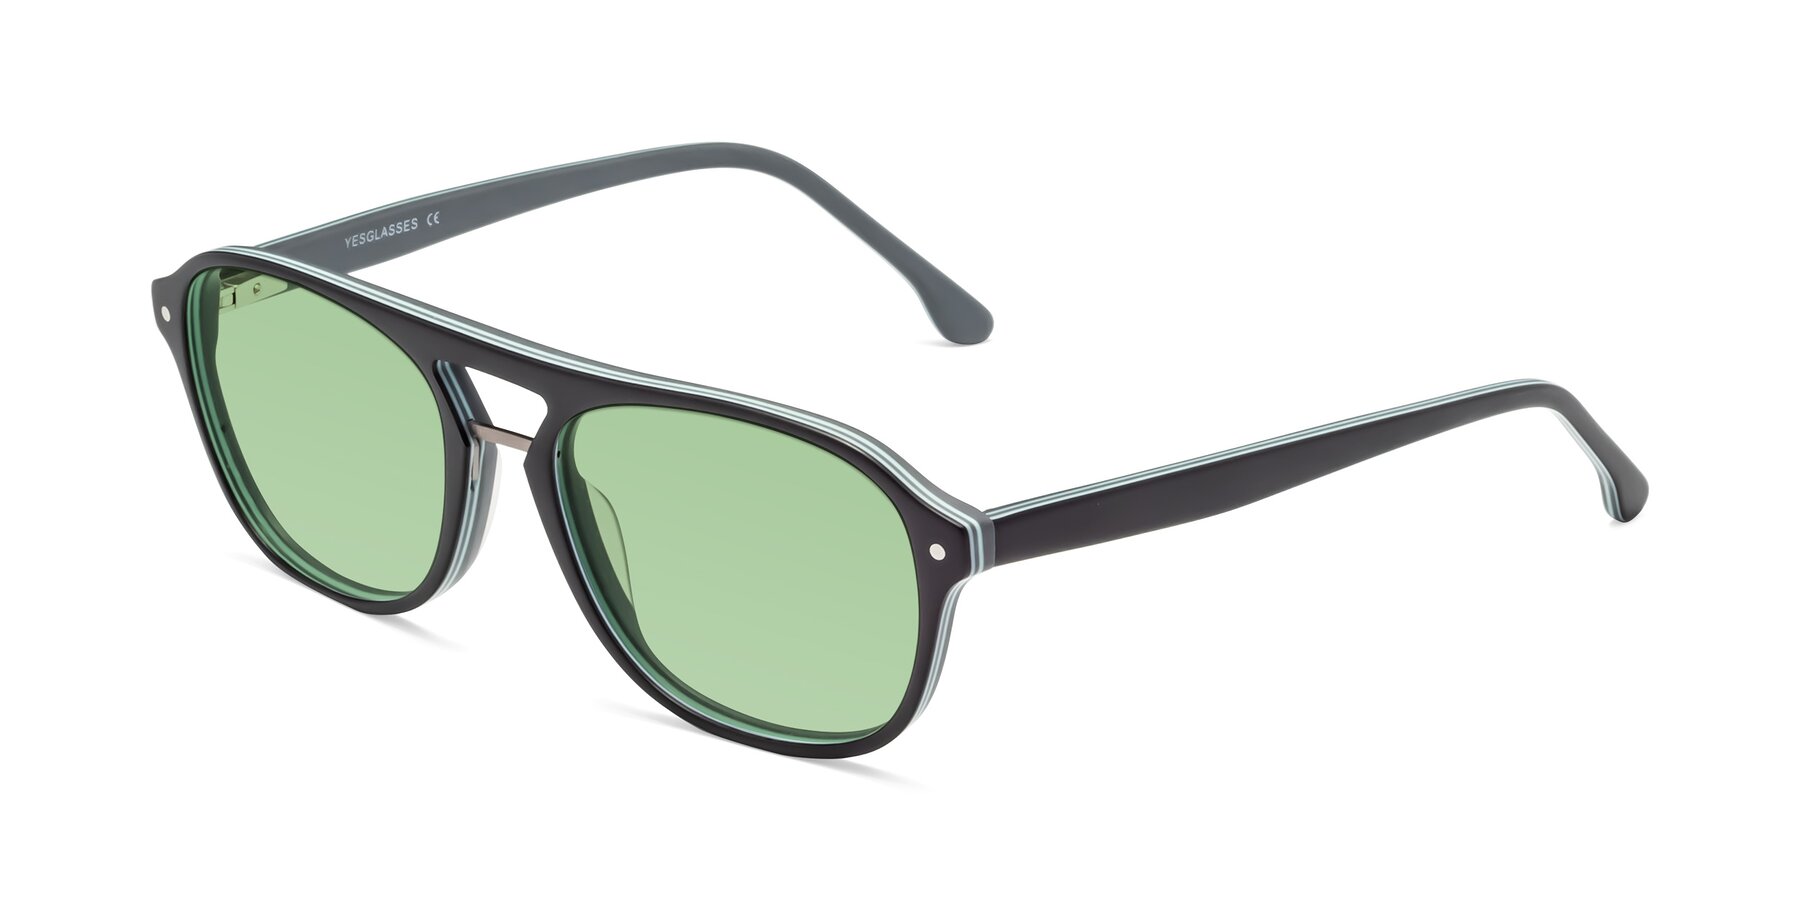 Angle of 17416 in Matte Black with Medium Green Tinted Lenses